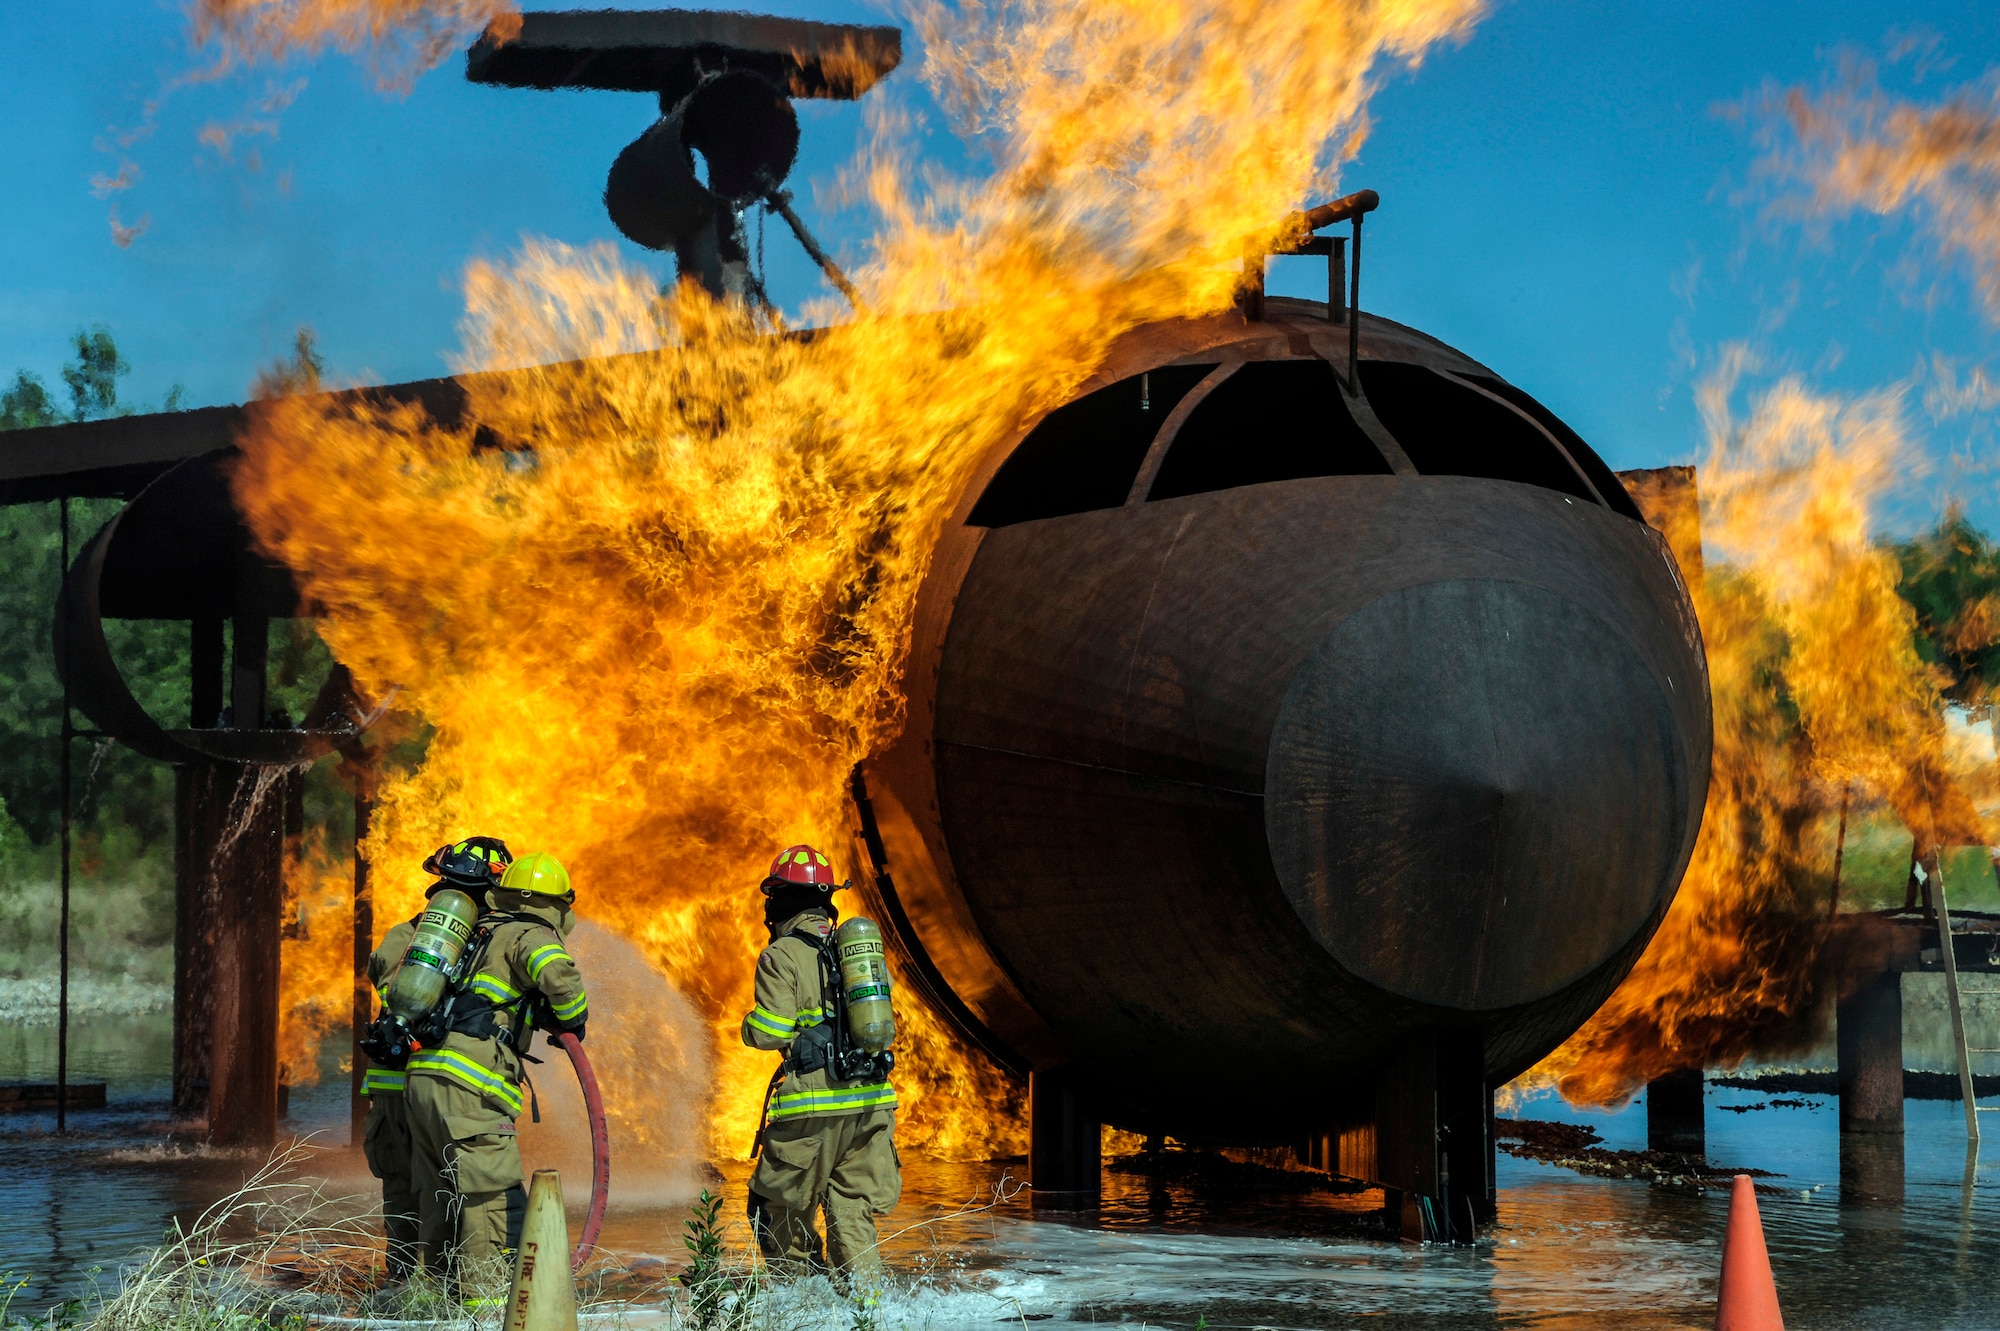 Firefighters with the 354th Civil Engineer Squadron Fire Department attempt to put out a flame on an aircraft fire trainer June 17, 2013, Eielson Air Force Base, Alaska. Fire training prepares firefighters to work as a team in the event that a fire hazard occurs. (U.S. Air Force photo by Senior Airman Zachary Perras/Released)